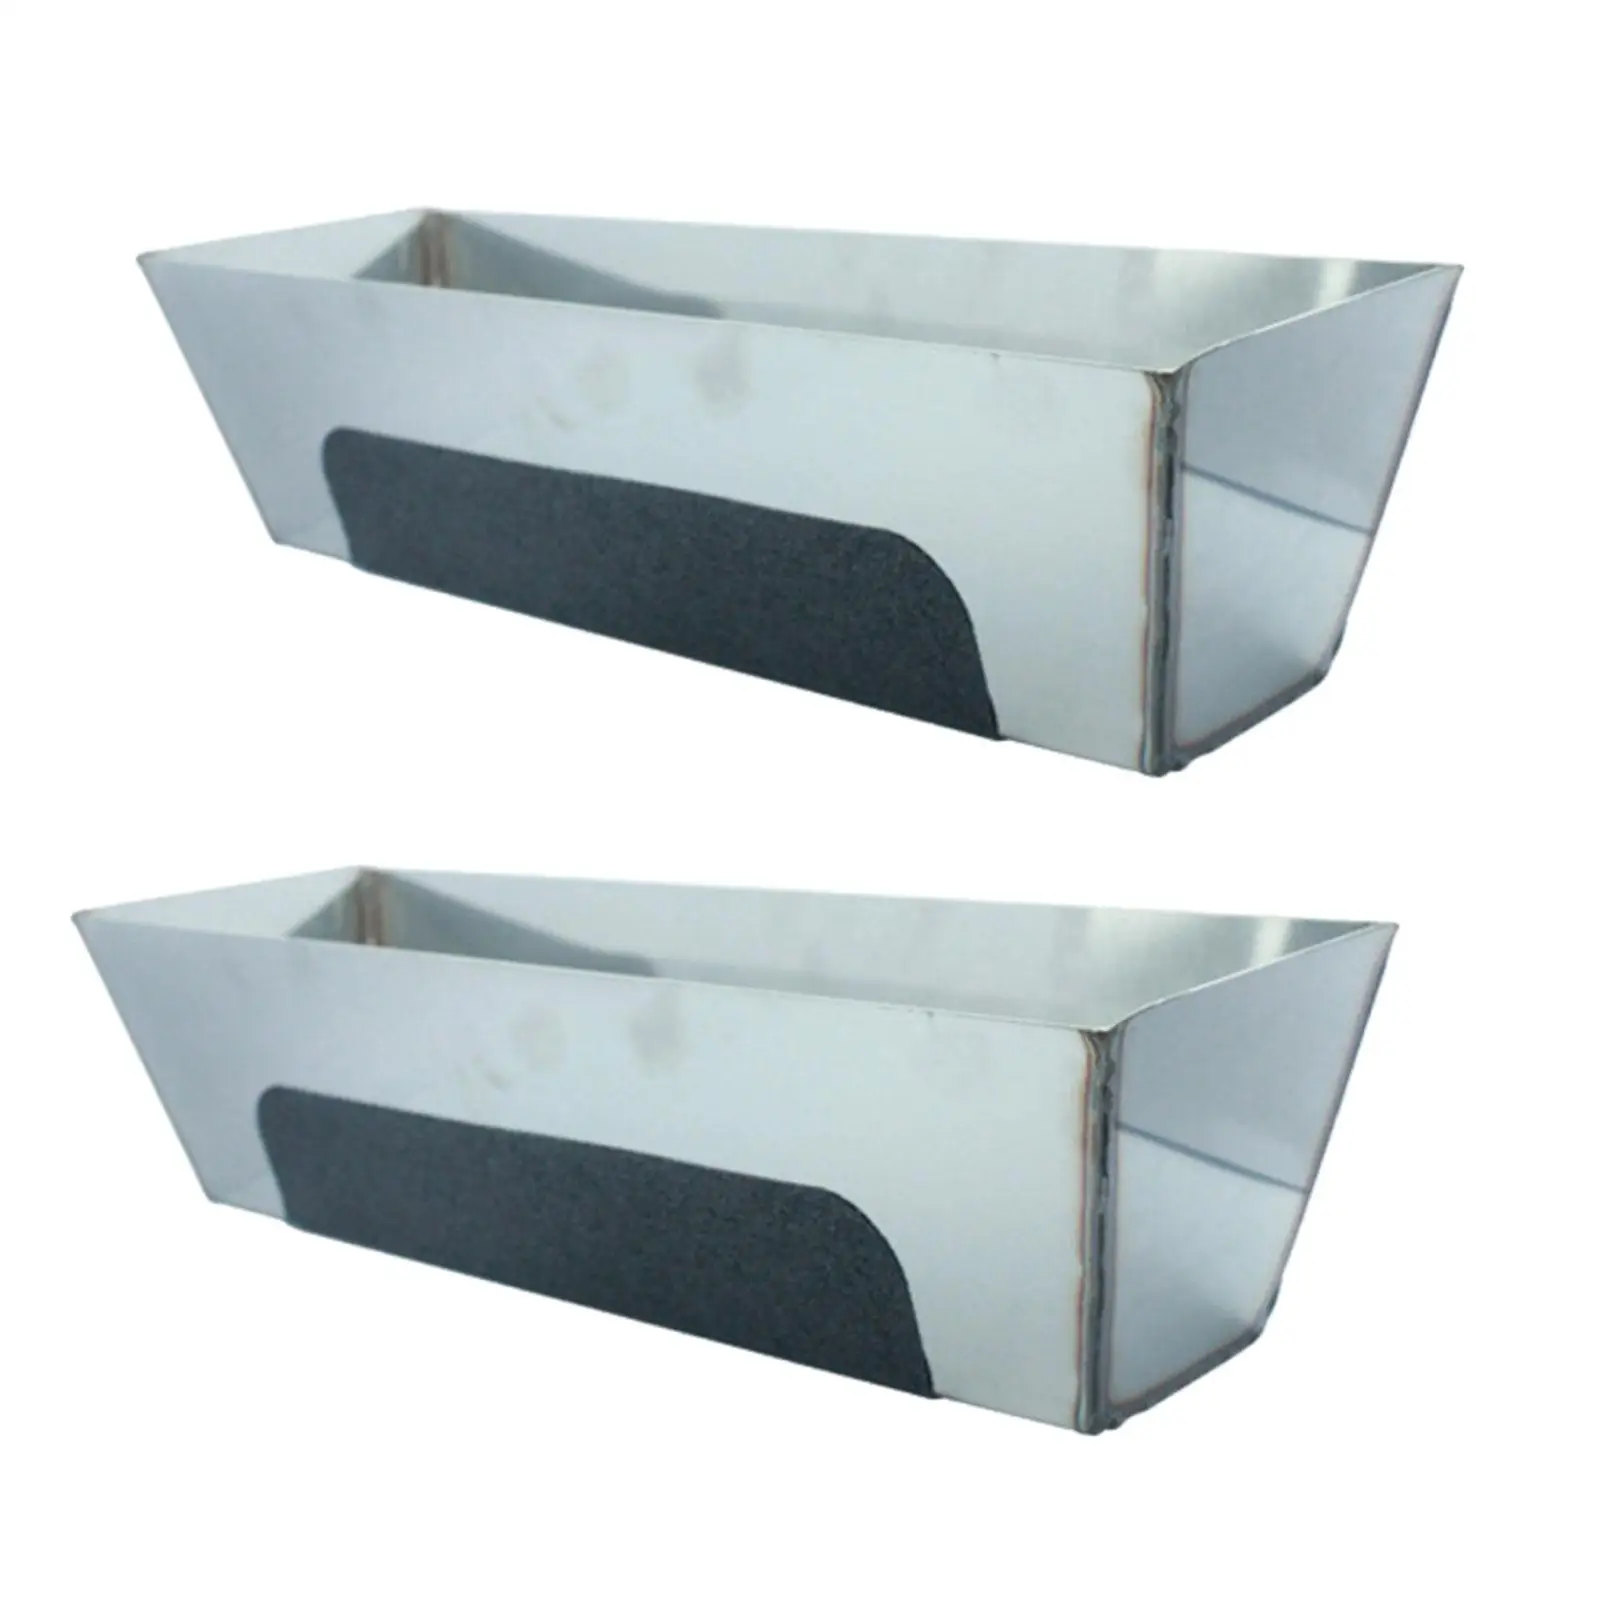 Stainless Steel Mud Pan Sheared Sides Bucket Tray Metal Fittings Drywall Durable Plastering Plasterers for Easy Knife Cleaning